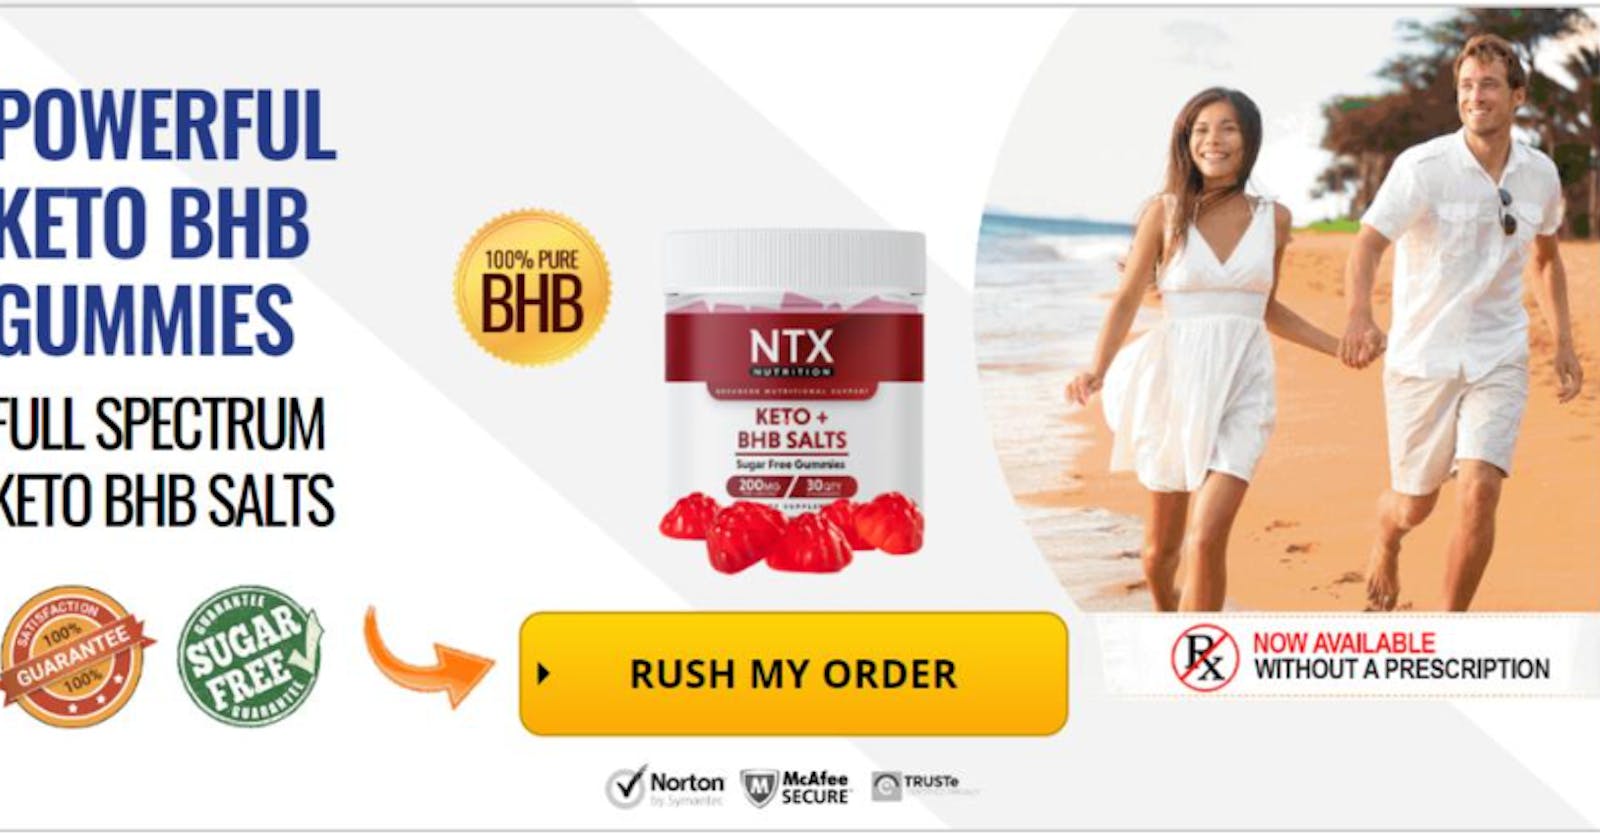 NTX Keto BHB Gummies (Scam Alert Review) #1 Weight Loss Gummy Or Waste Of Money?